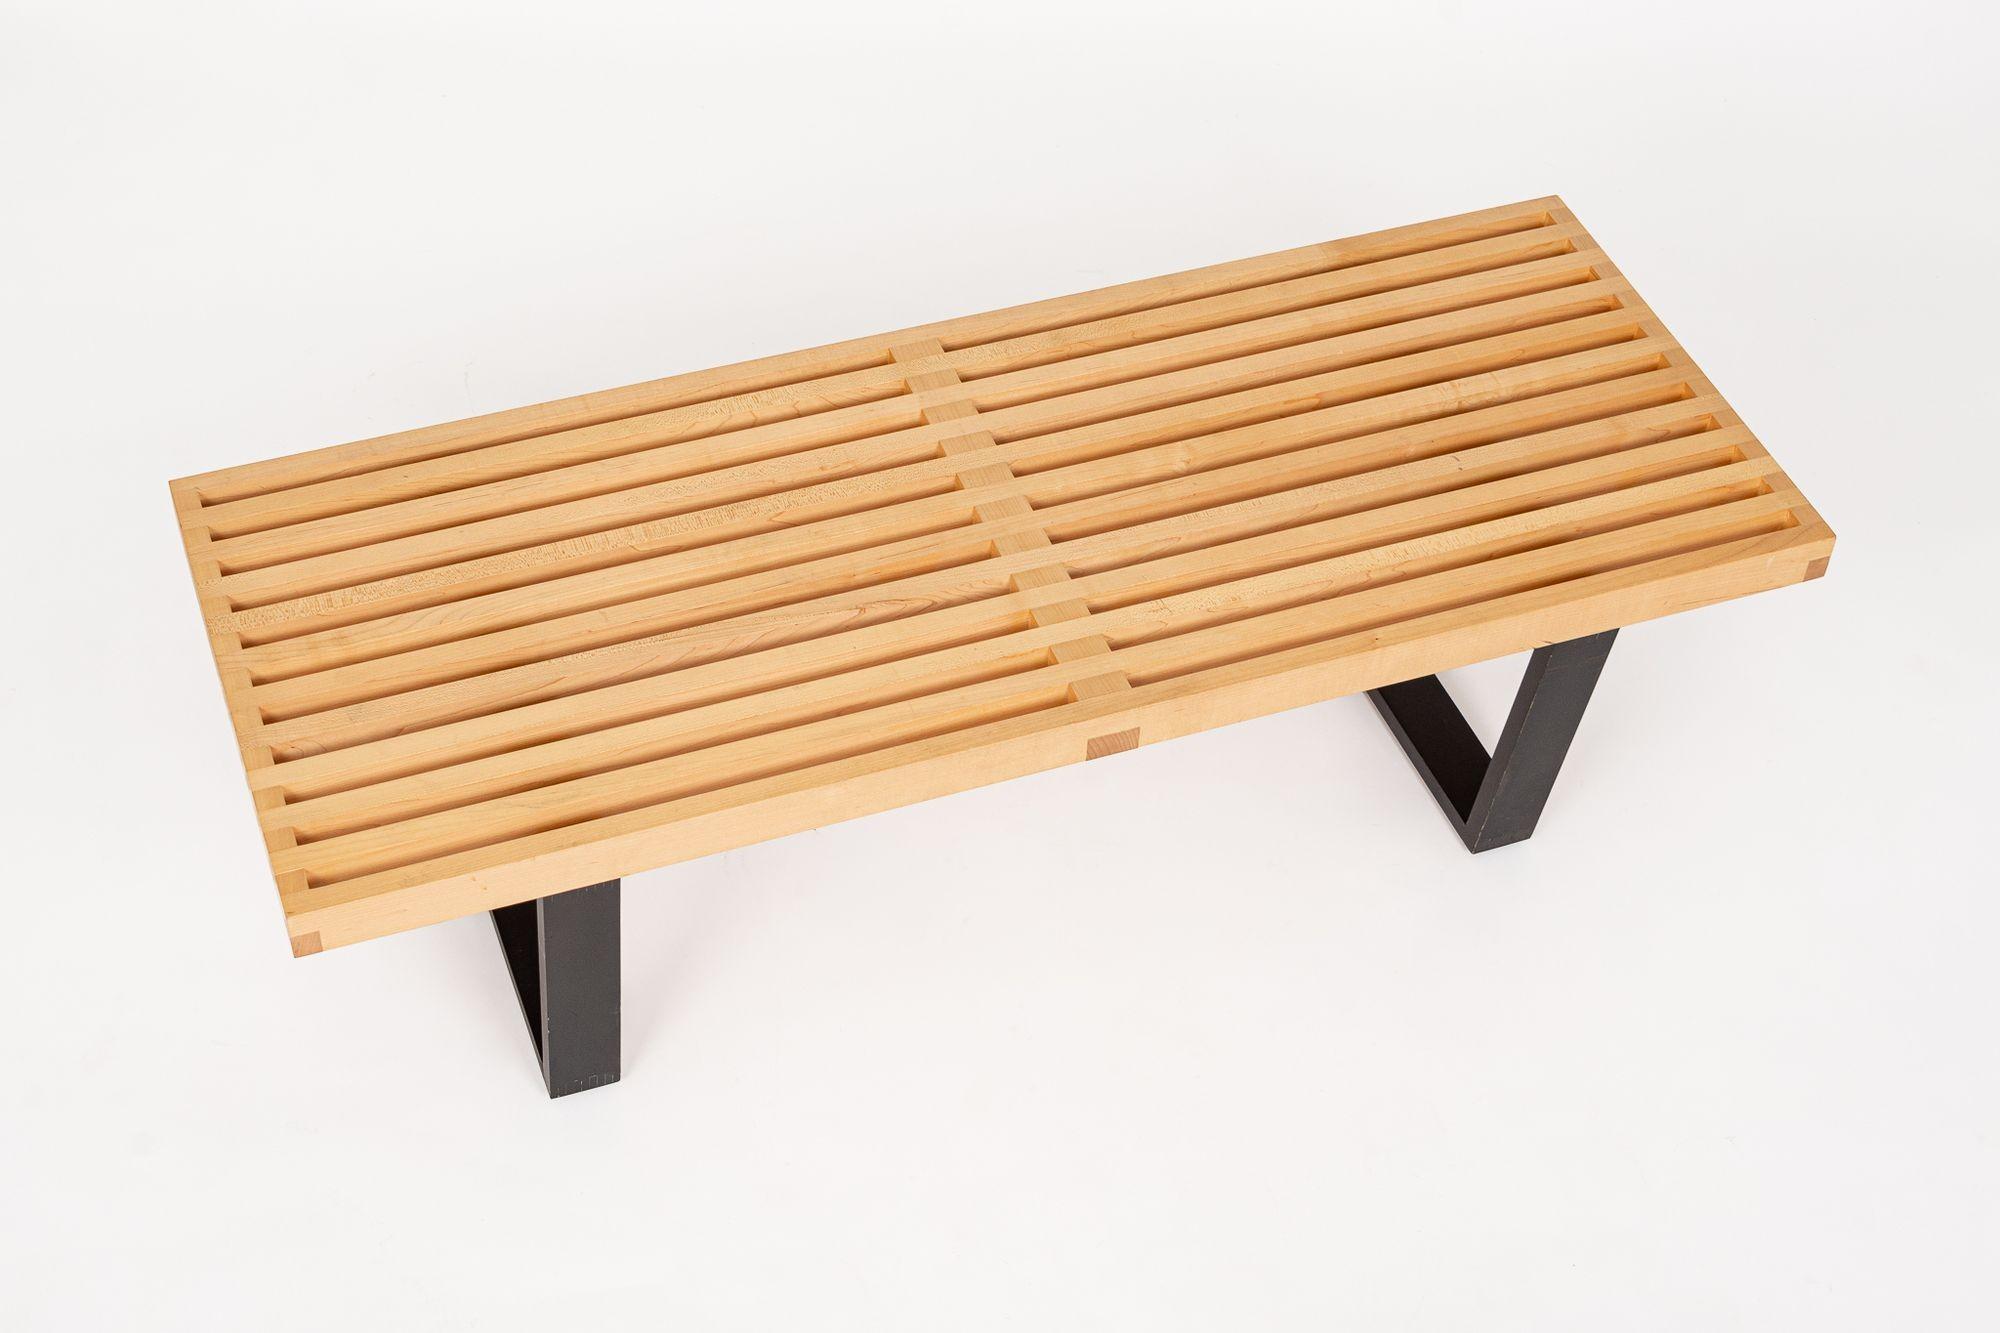 American Mid Century Wood Platform Bench by George Nelson for Herman Miller